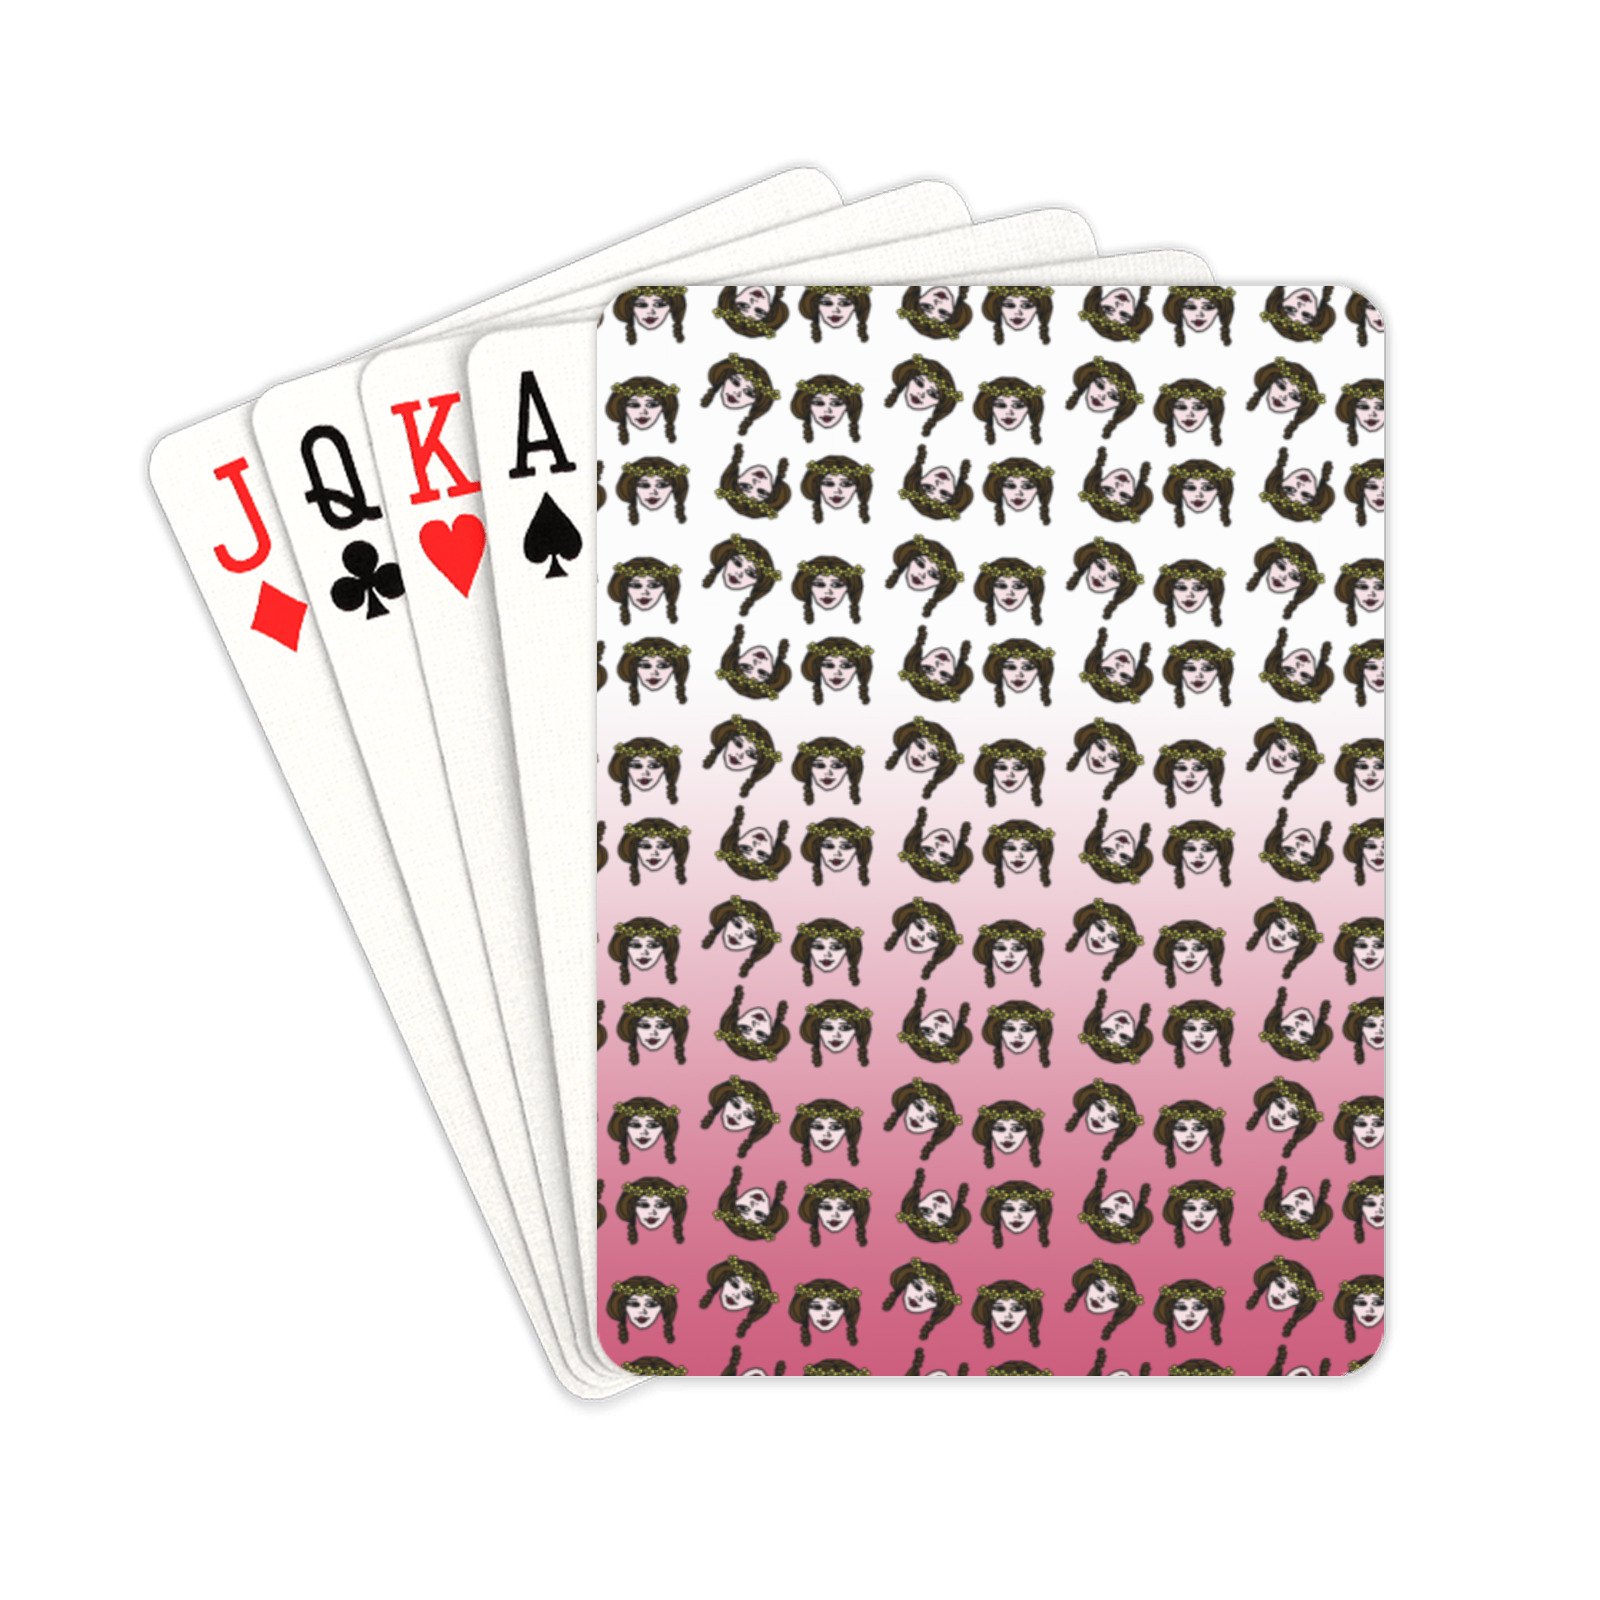 retro girl daisy chain pattern Playing Cards 2.5"x3.5"